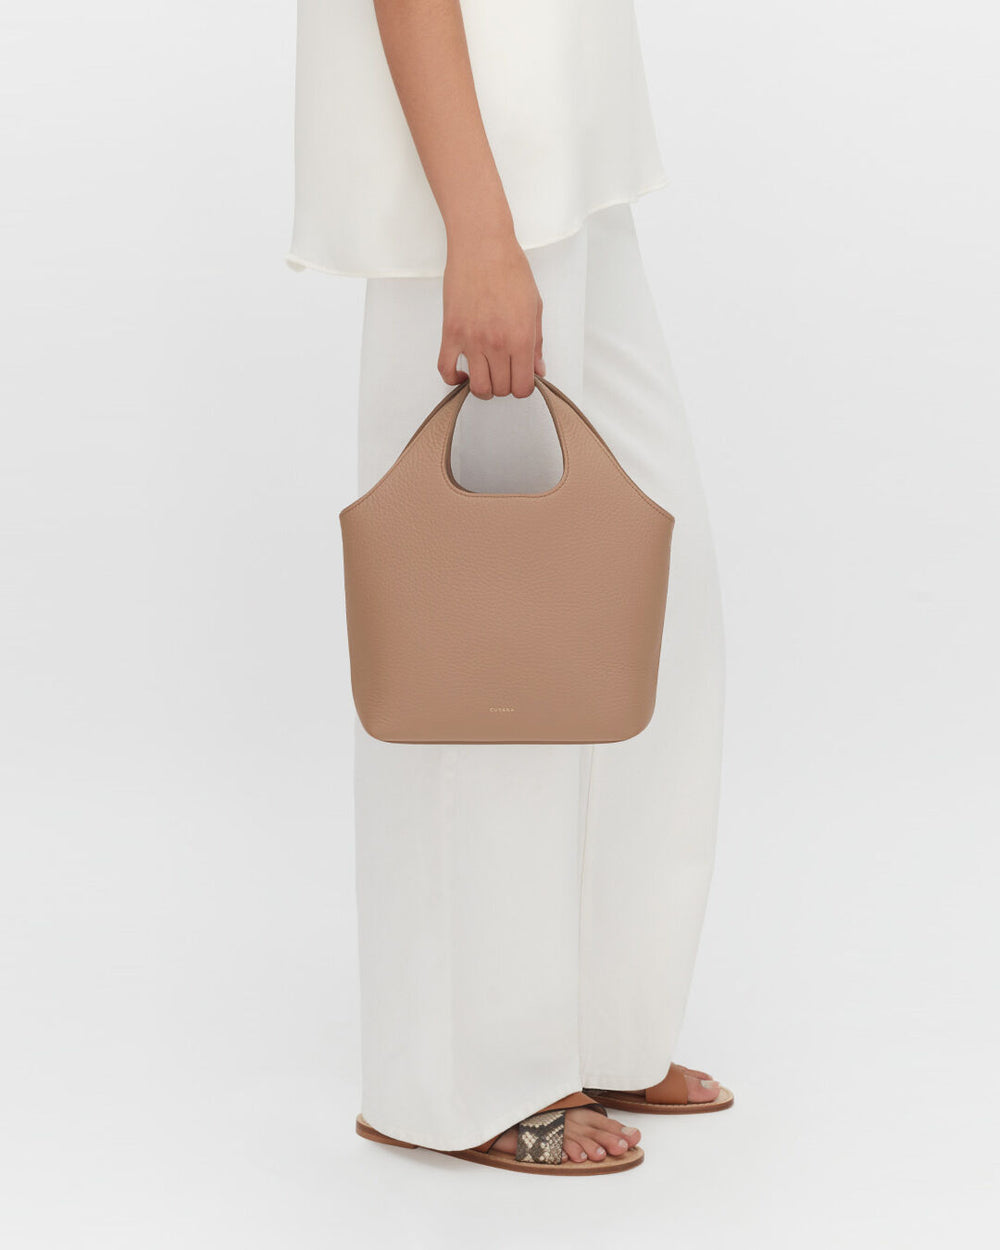 Person holding a handbag, wearing wide pants and sandals, viewed from the waist down.